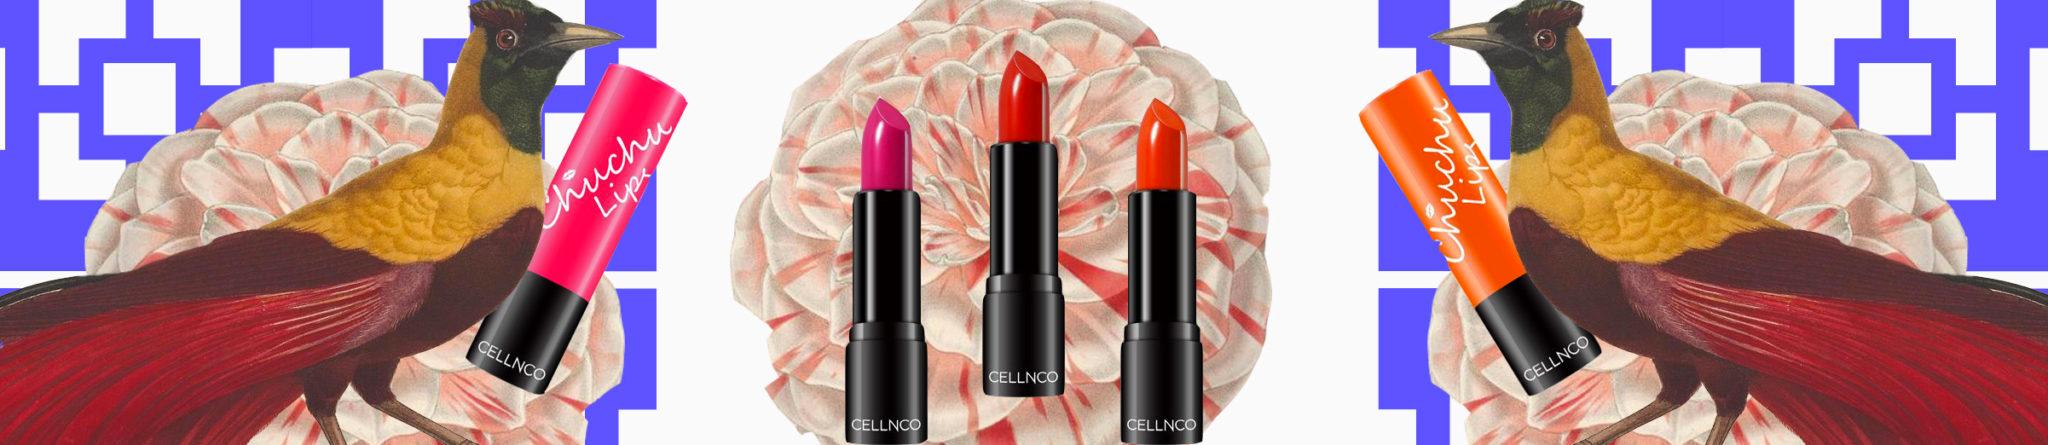 This Is What I Wear For Kick-ass, Solange-Level Slayage: CELLNCO ChuChu Lips